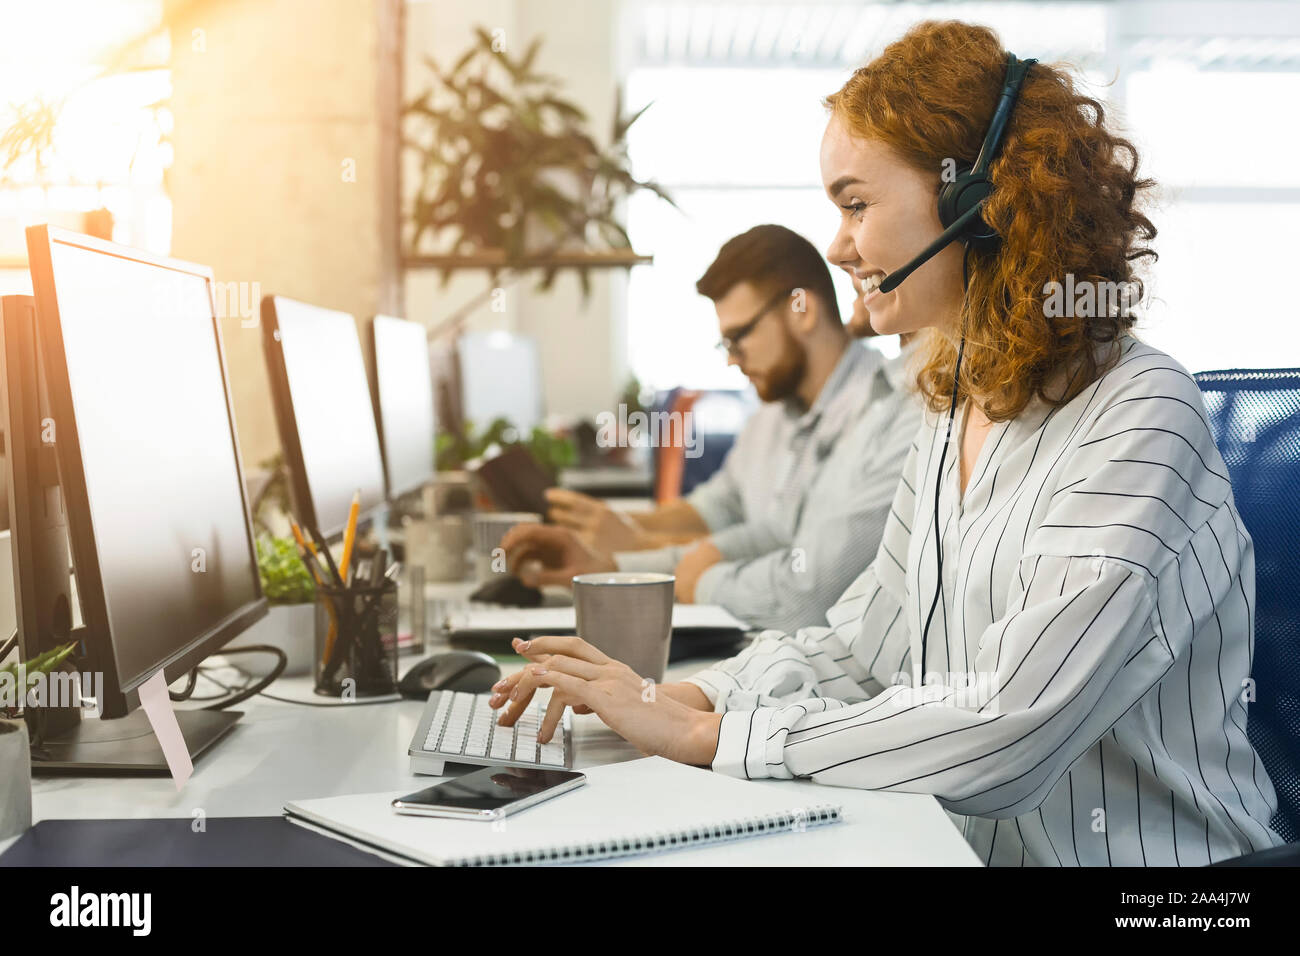 Positive woman operator consulting client by phone Stock Photo